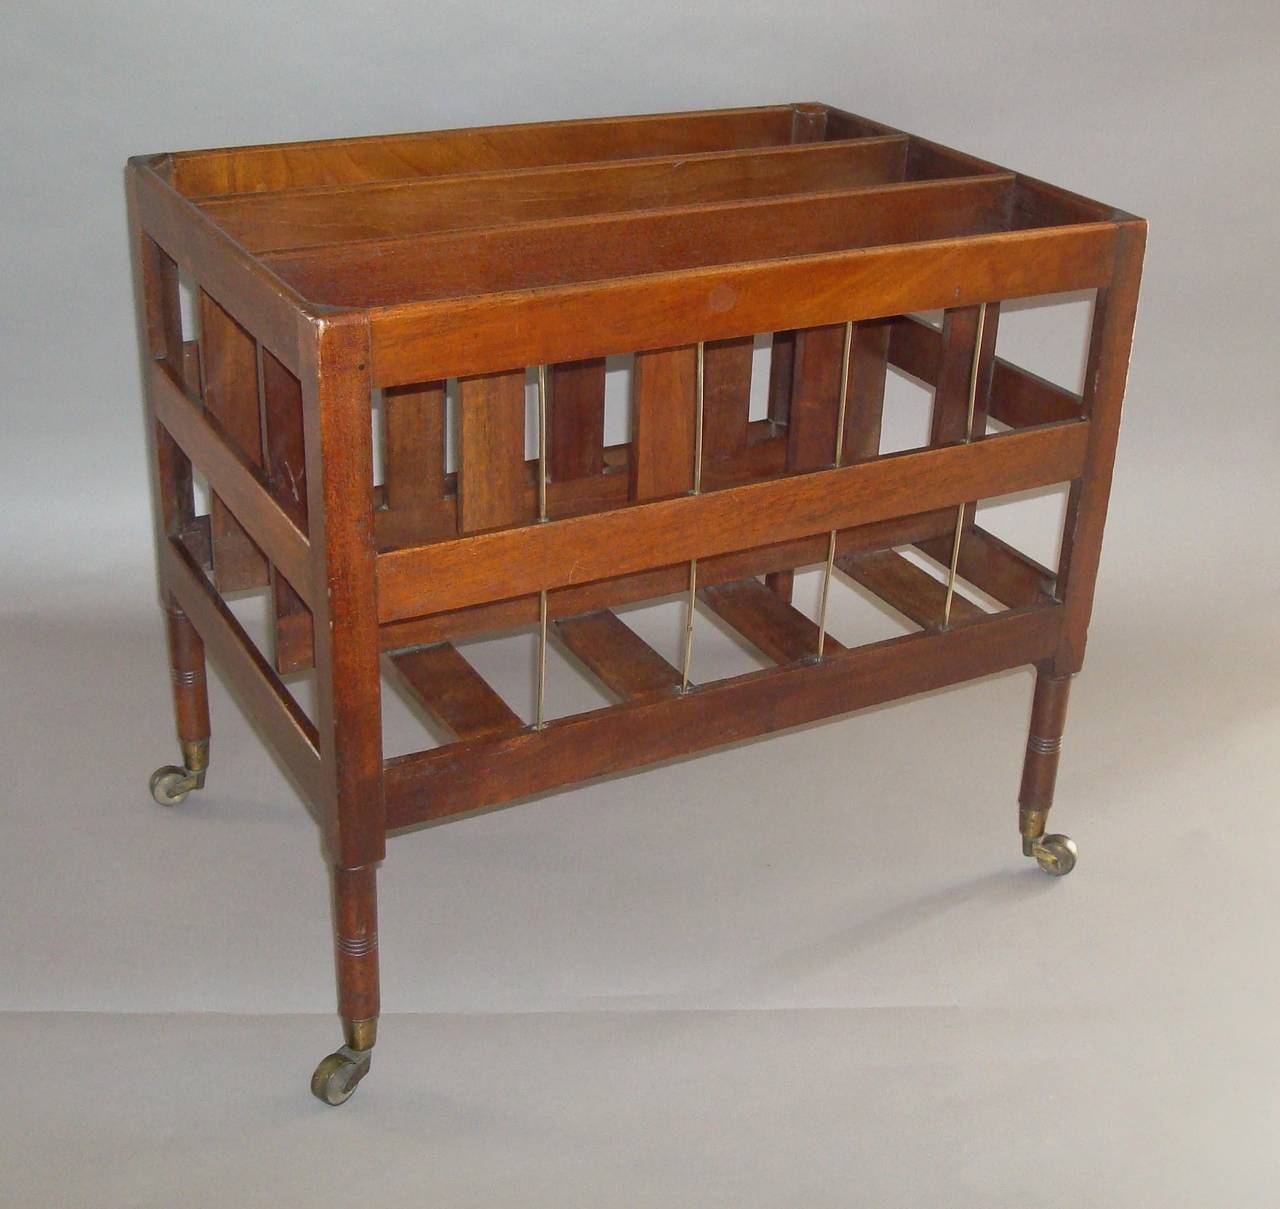 An elegant Regency mahogany canterbury of unusual open slatted form; with three interior divisions, the front and reverse incorporating two rows of vertical brass rods, raised on slender turned legs with original brass cup castors.